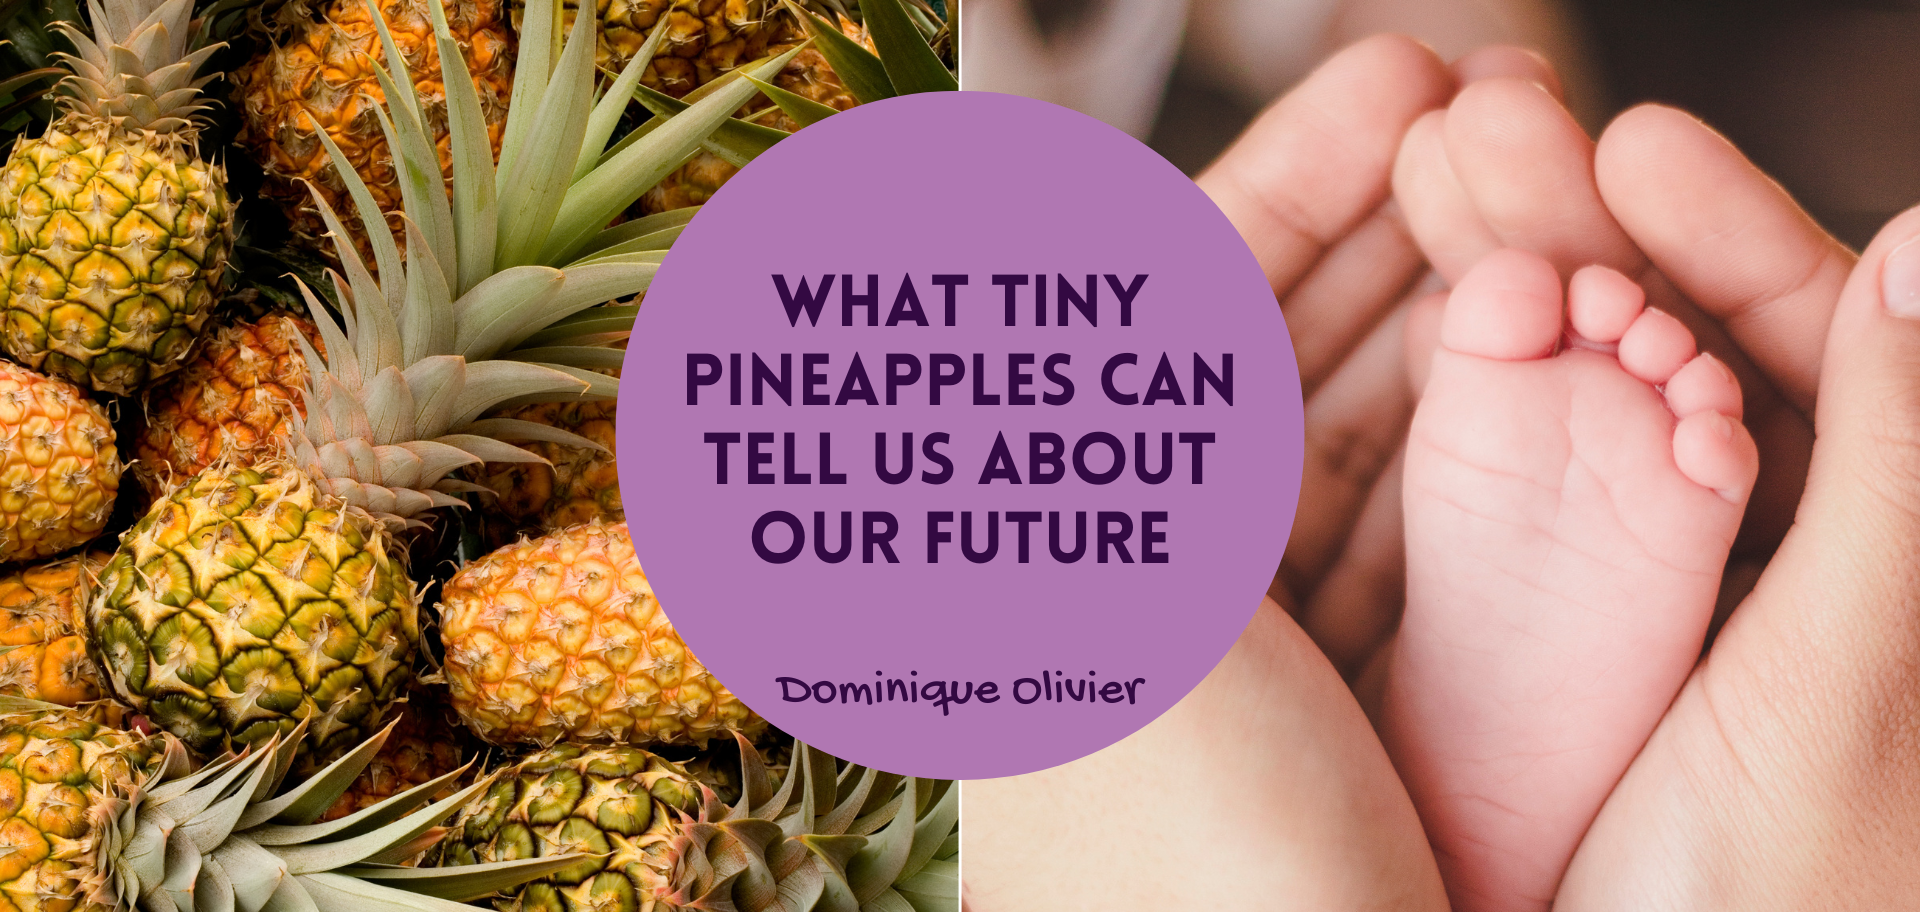 What tiny pineapples can tell us about our future